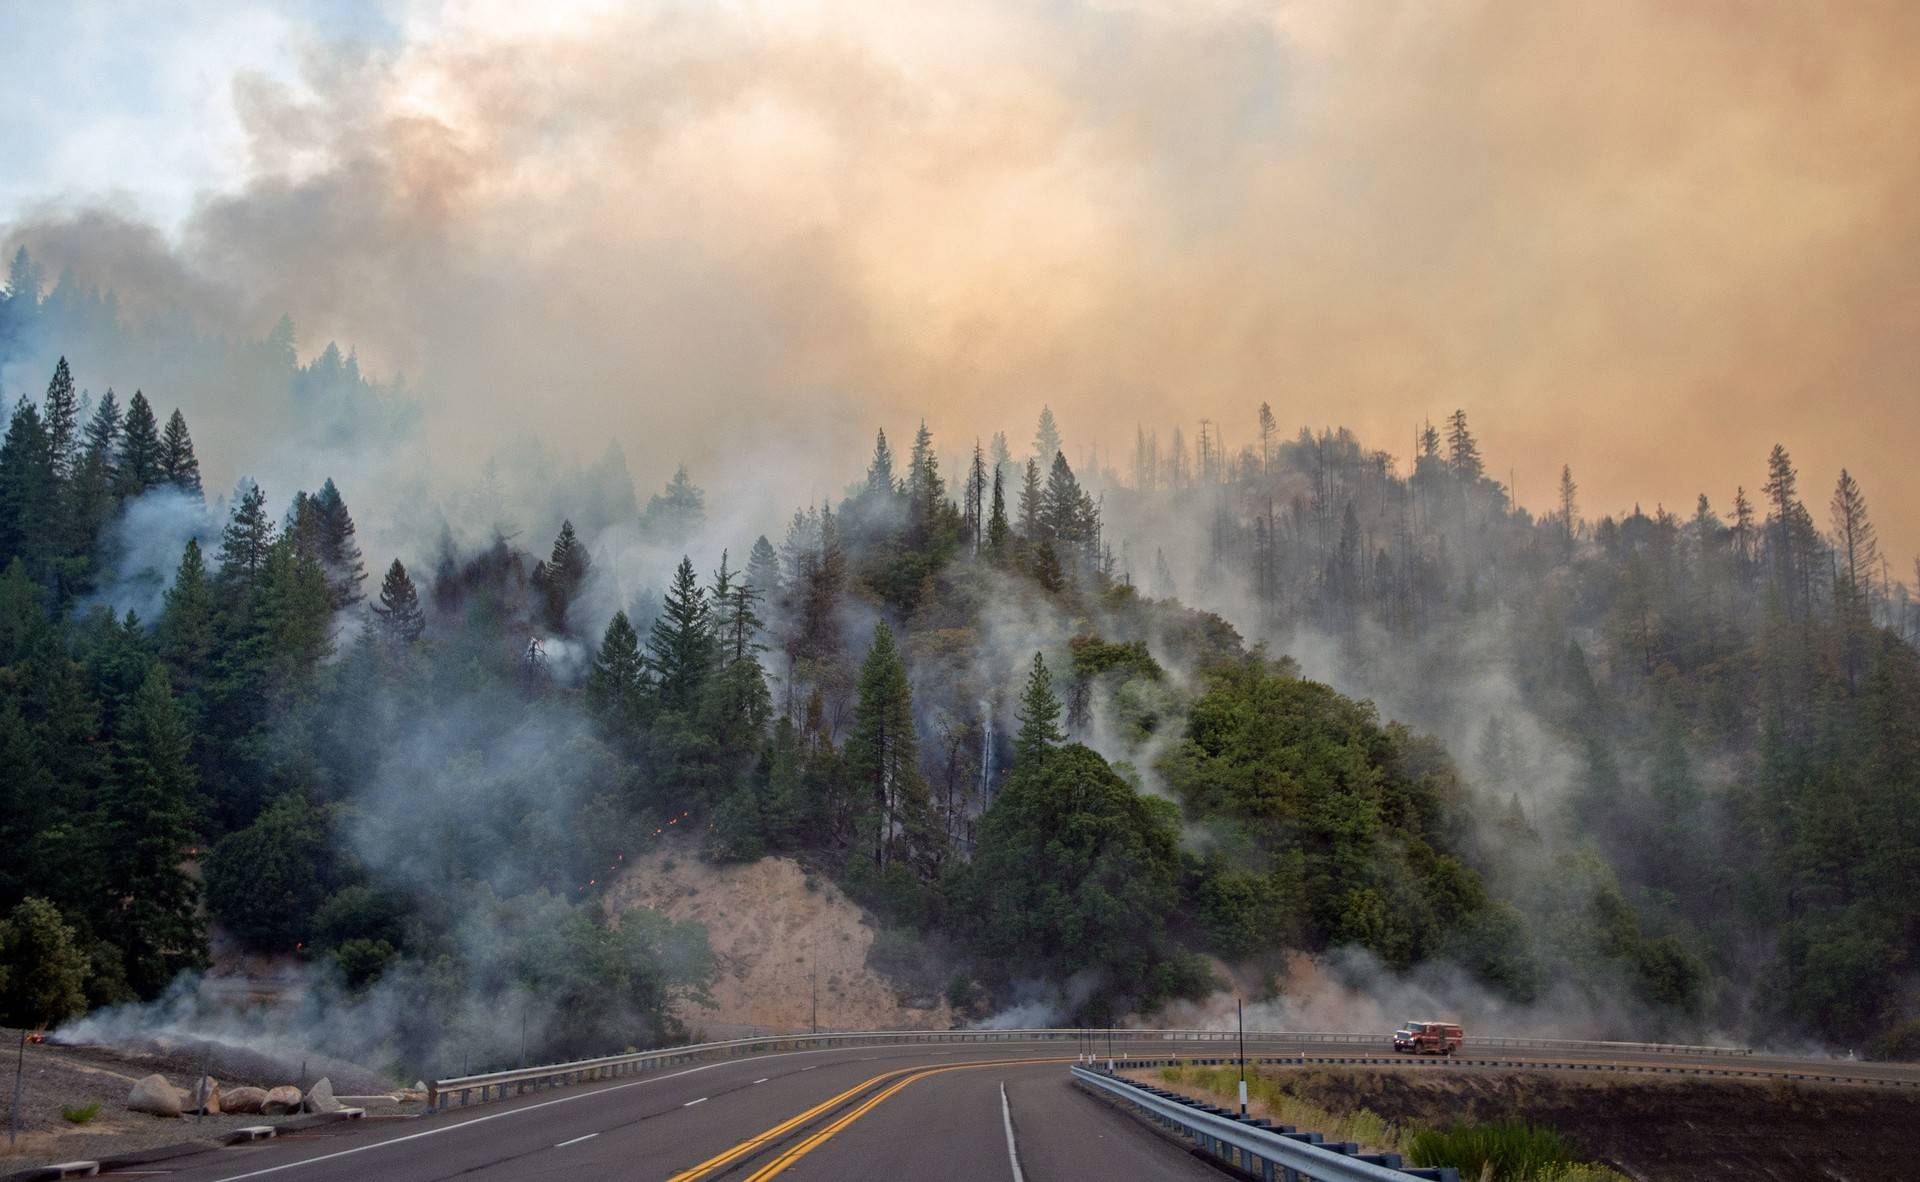 A fire truck drives along Highway 299 as the Carr Fire continues to burn near Whiskeytown, California, on July 28, 2018. JOSH EDELSON/AFP/Getty Images